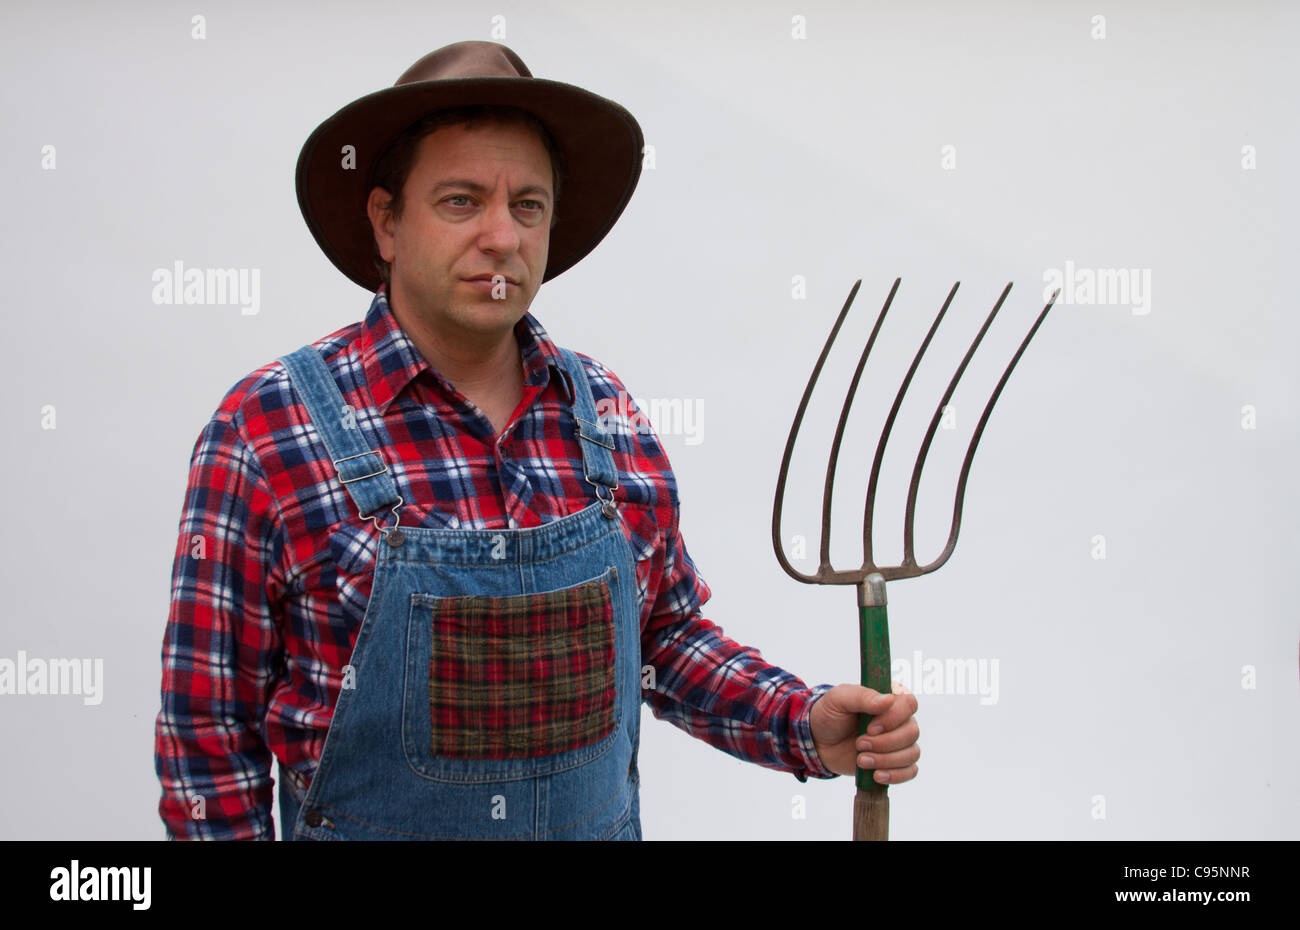 Farmer with pitchfork. Stock Photo